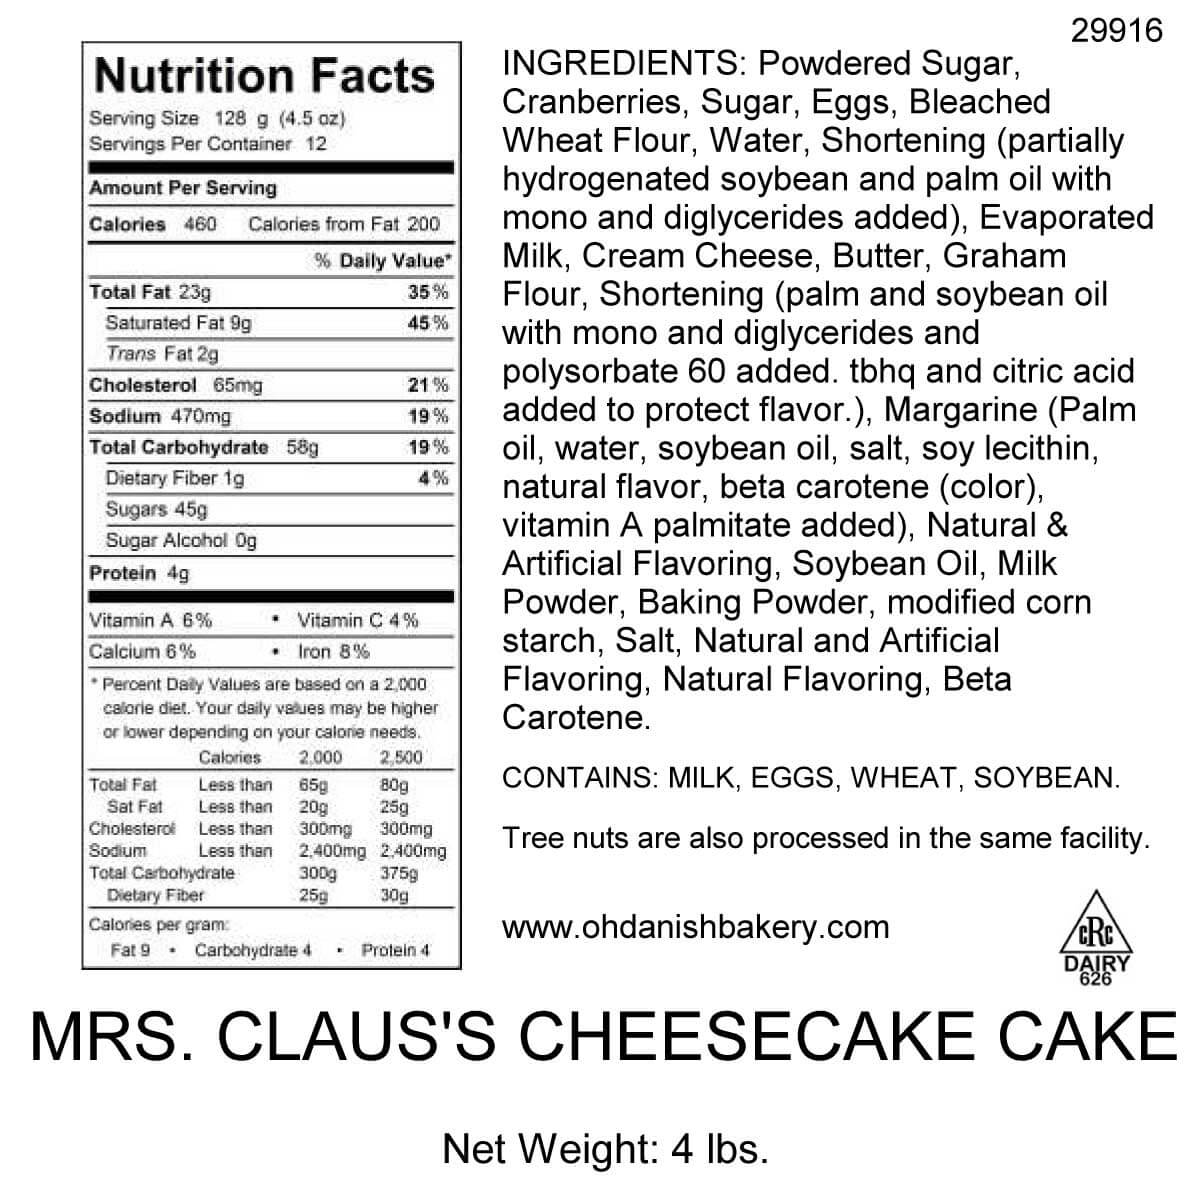 Nutritional Label for Mrs. Claus' Cheesecake Cake